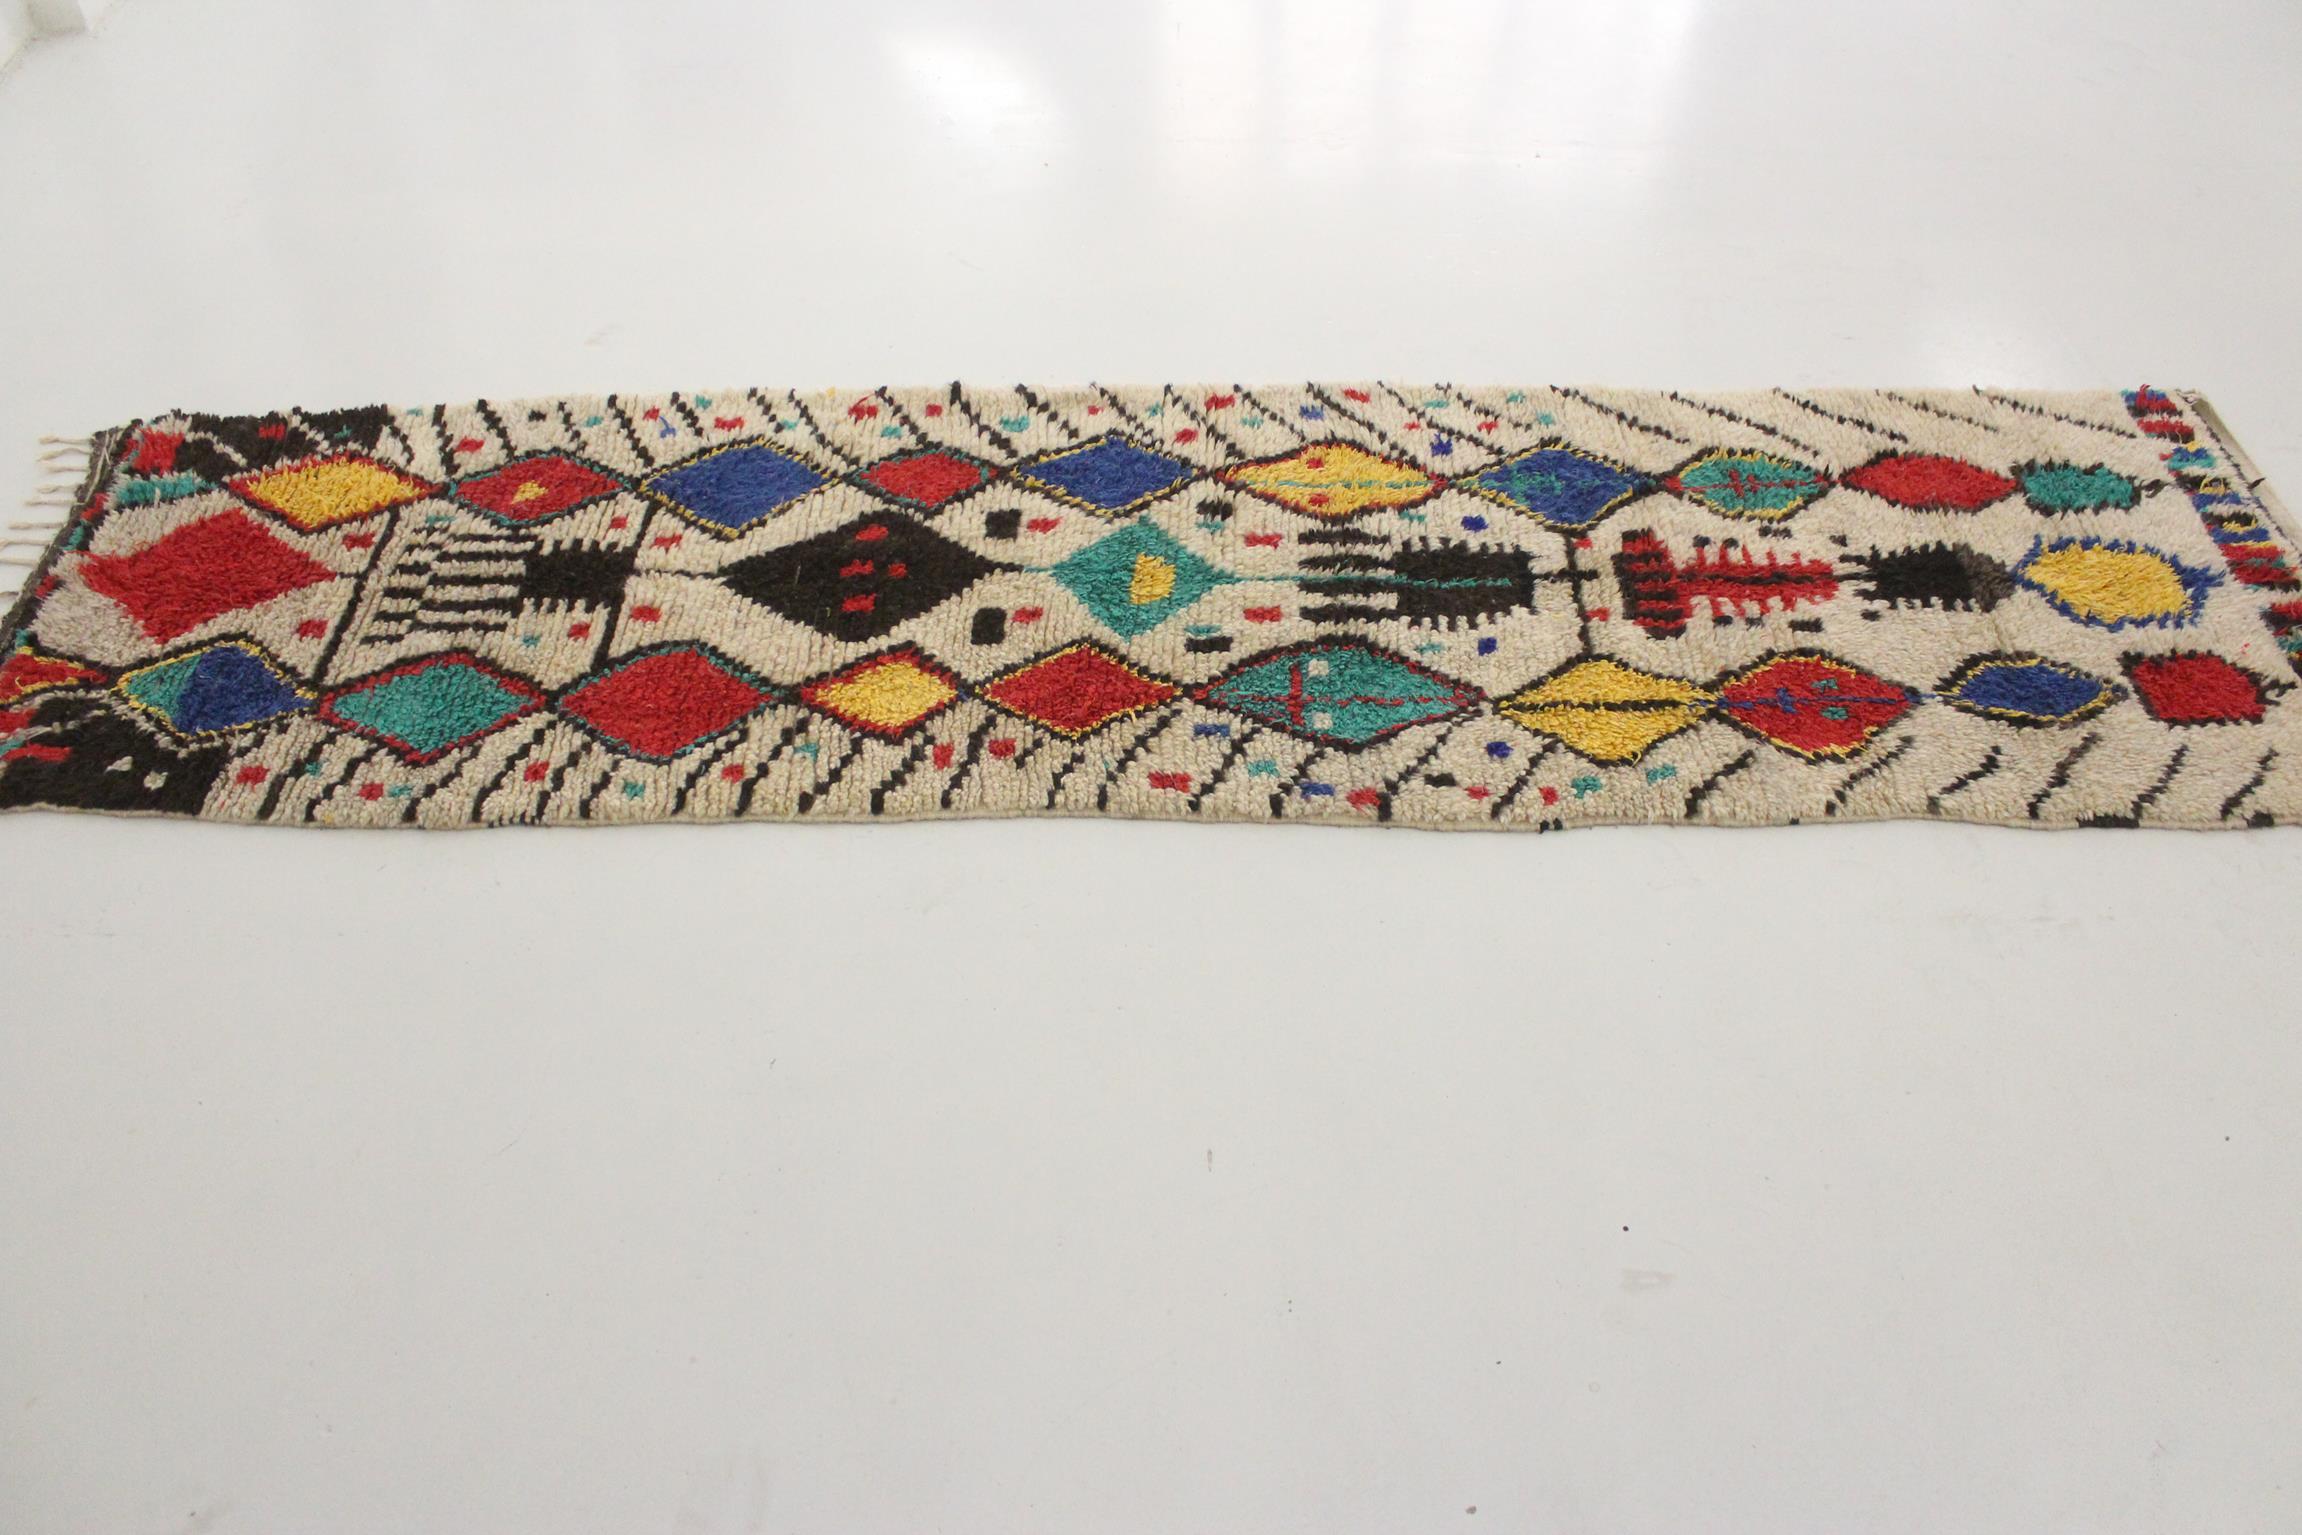 Tribal Vintage Moroccan Azilal runner rug - 3.1x11.3feet / 95x345cm For Sale